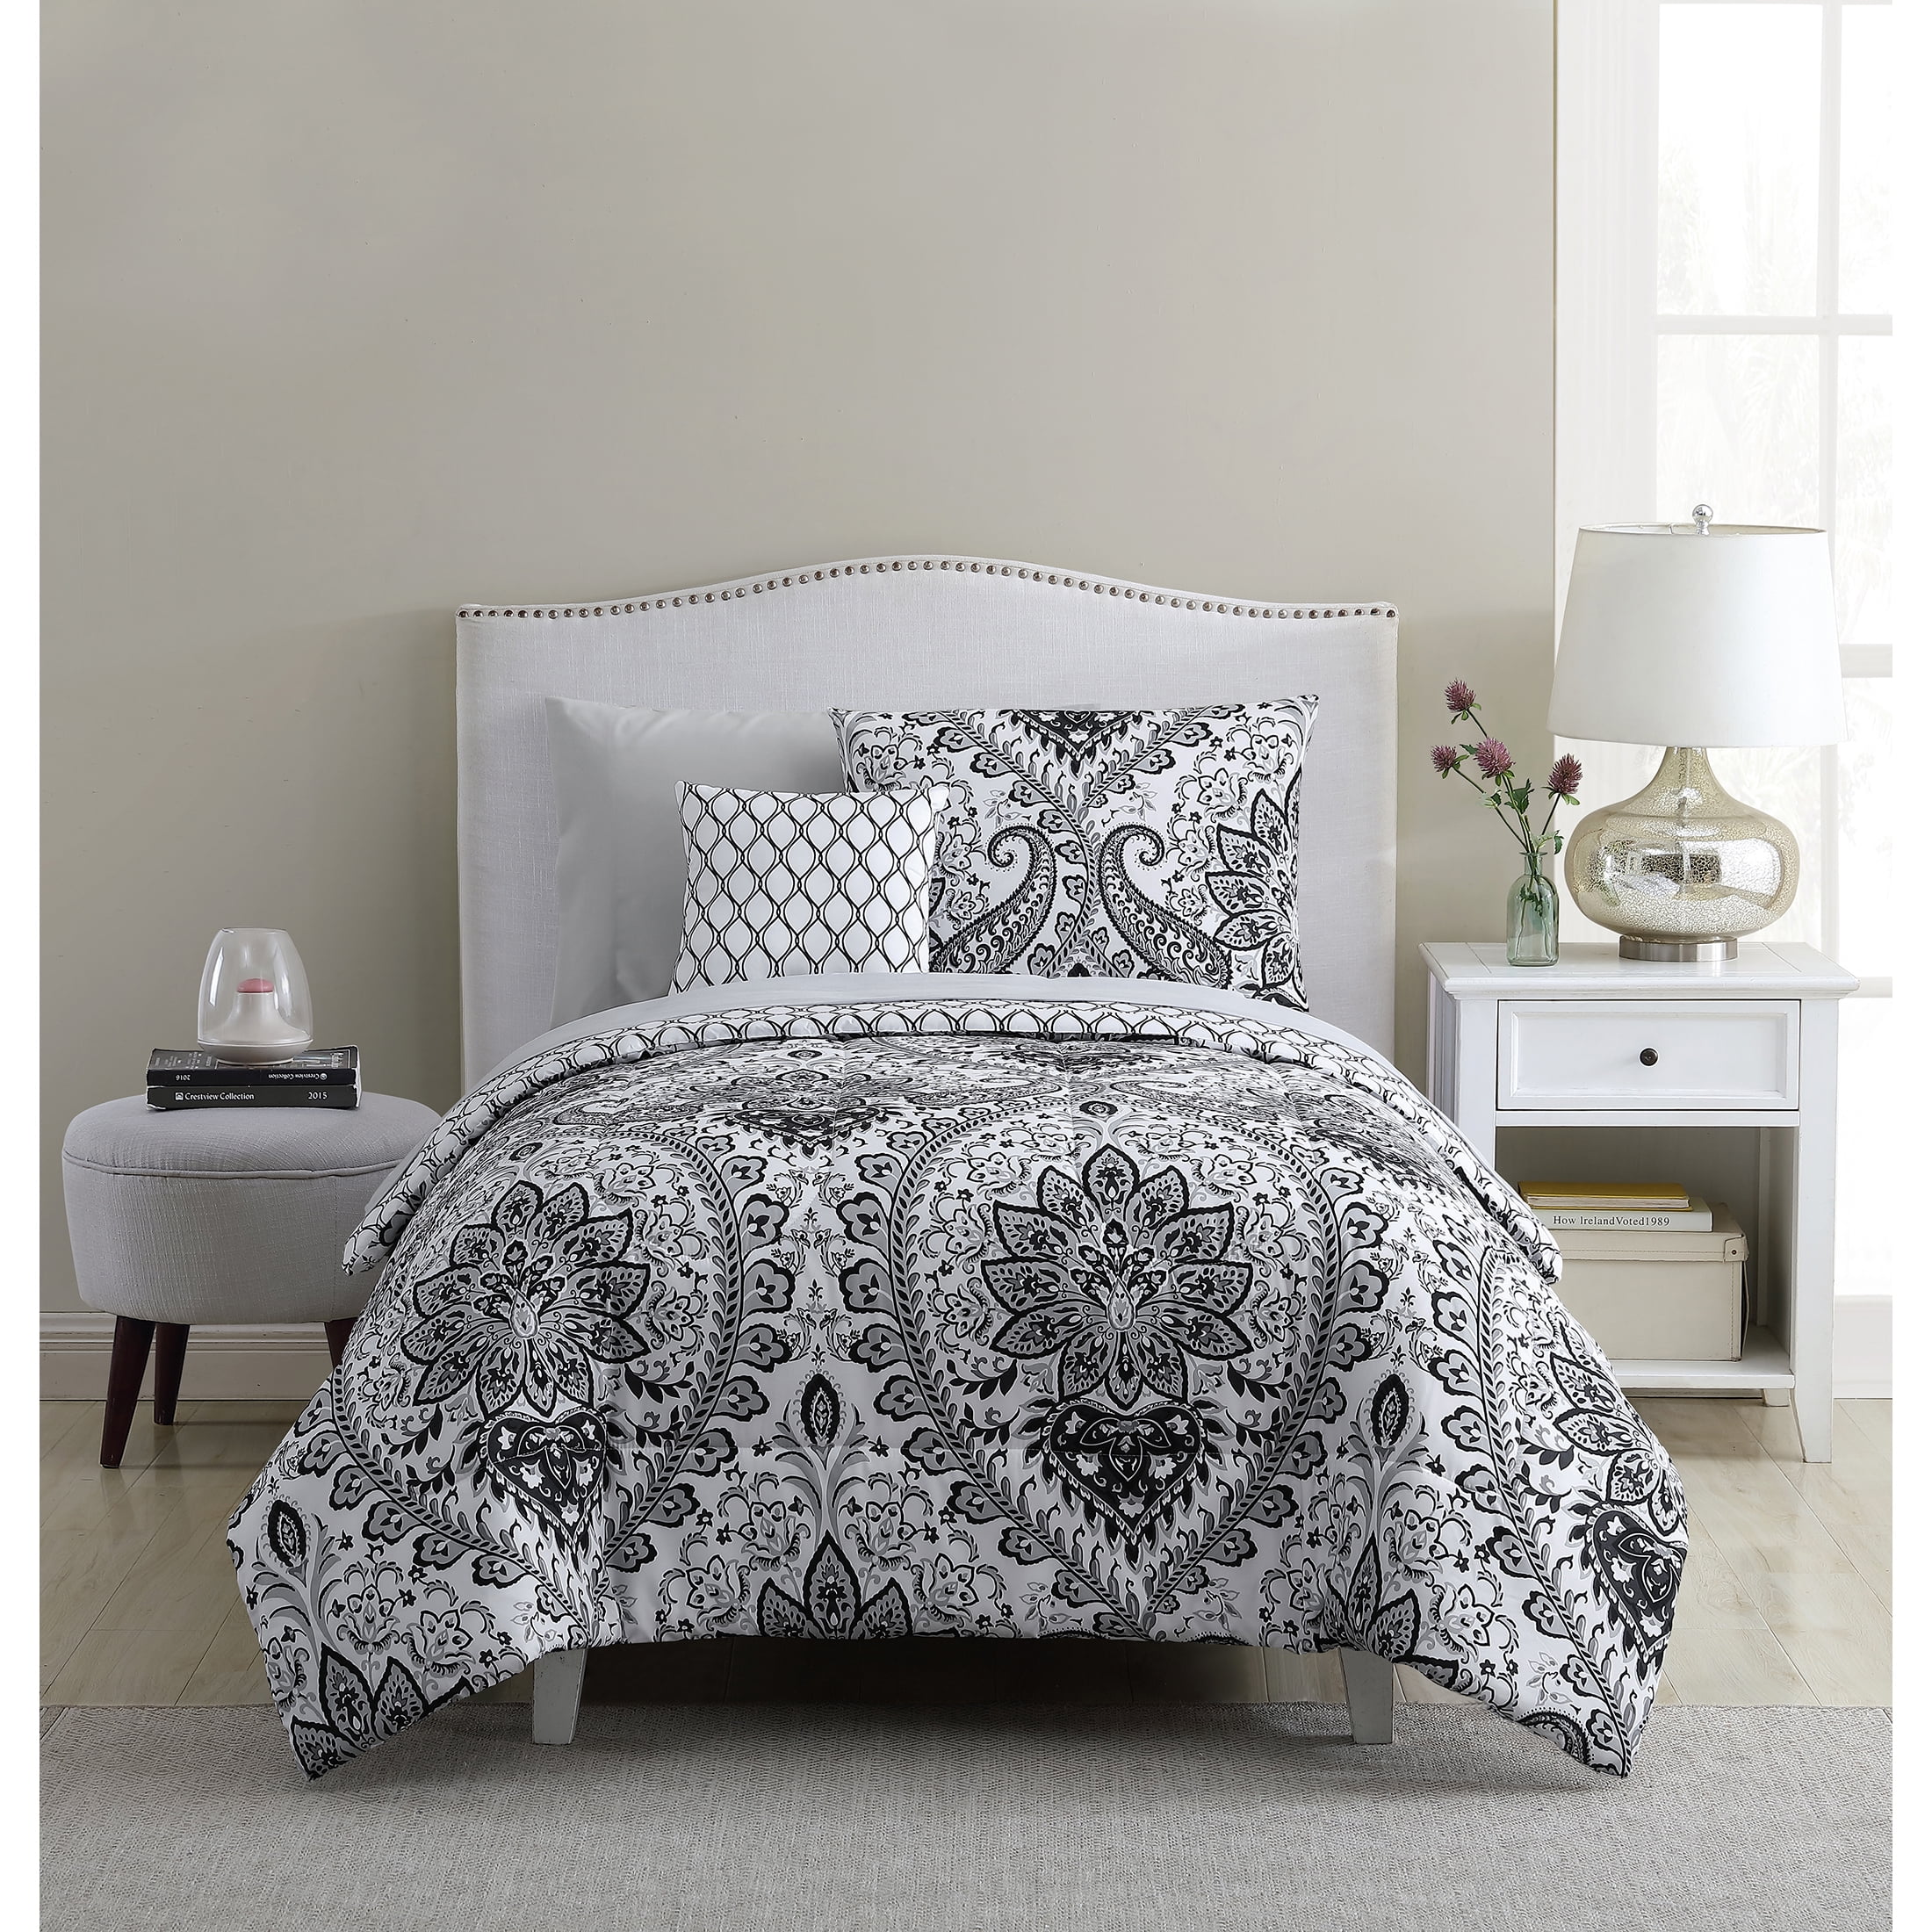 Reversible Twin Xl, Jcpenney Twin Xl Bedding